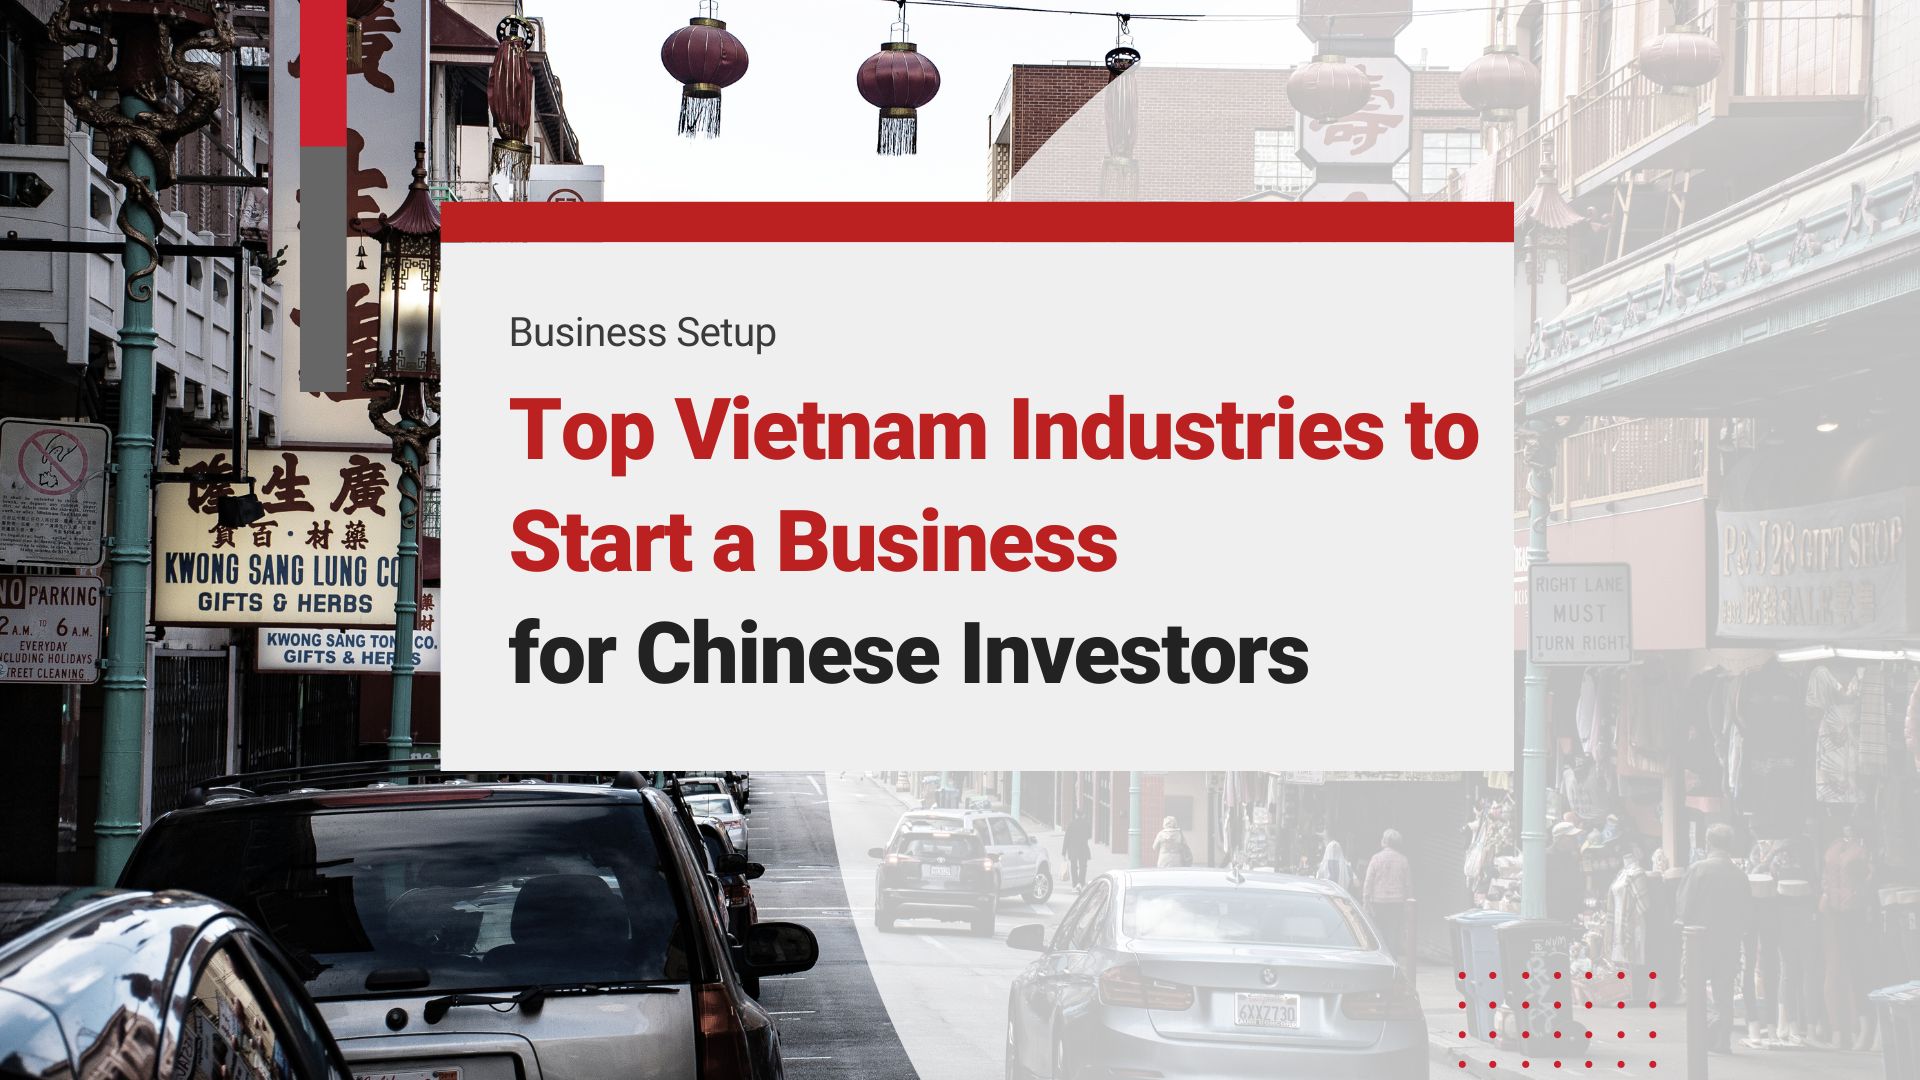 Top Industries for Chinese Investors in Vietnam